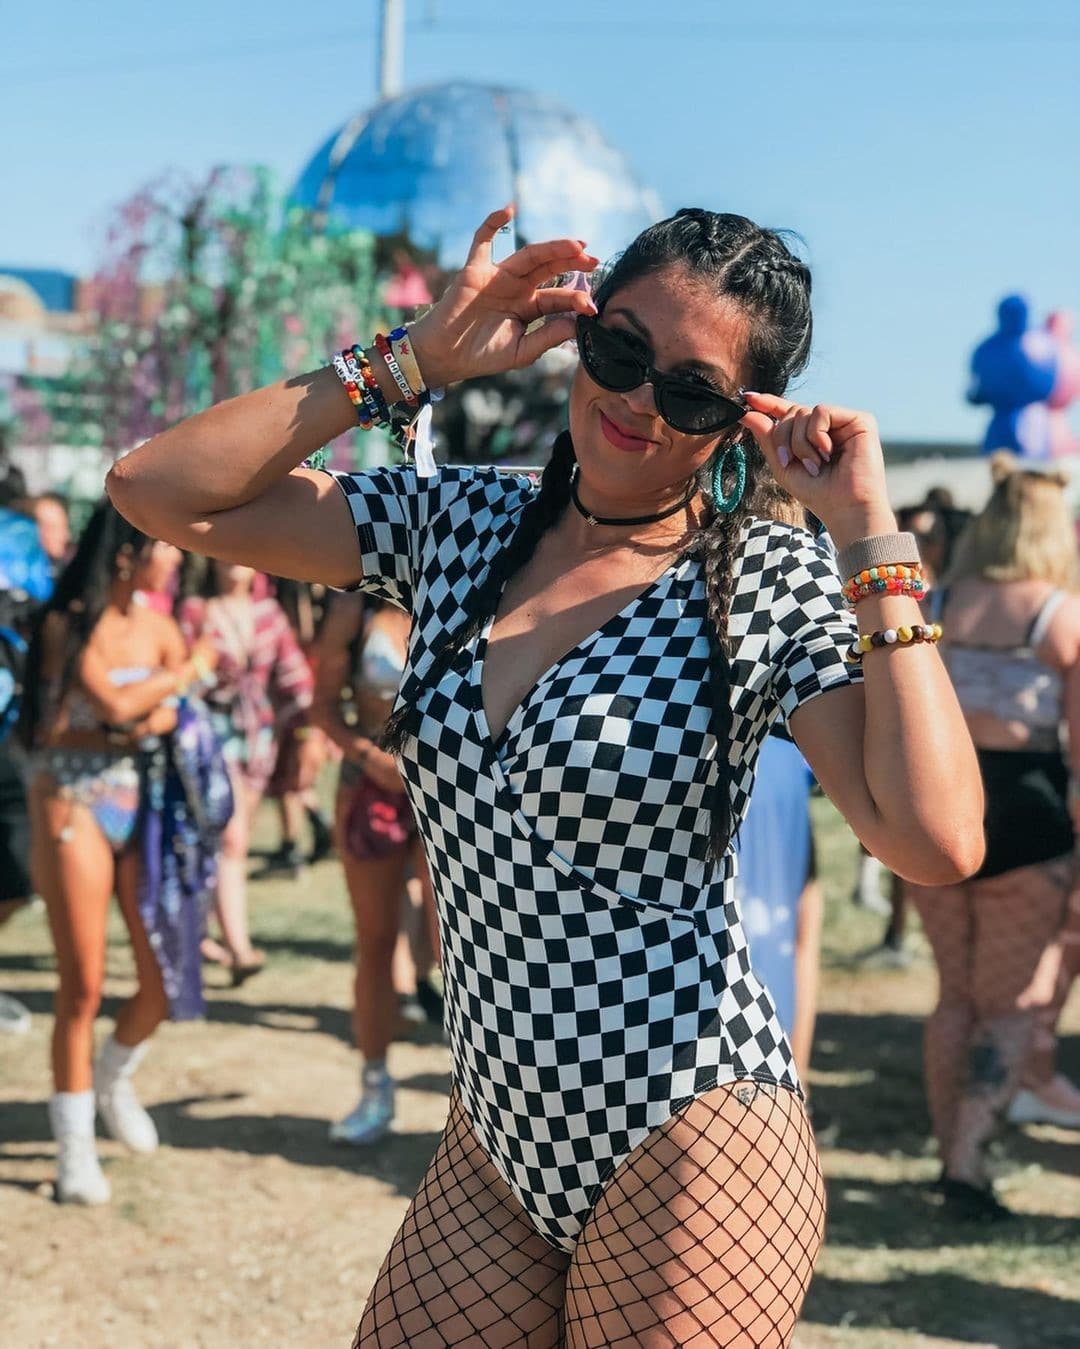 EDM Festival Outfits - 24 Outfits To Wear To A Music Festival